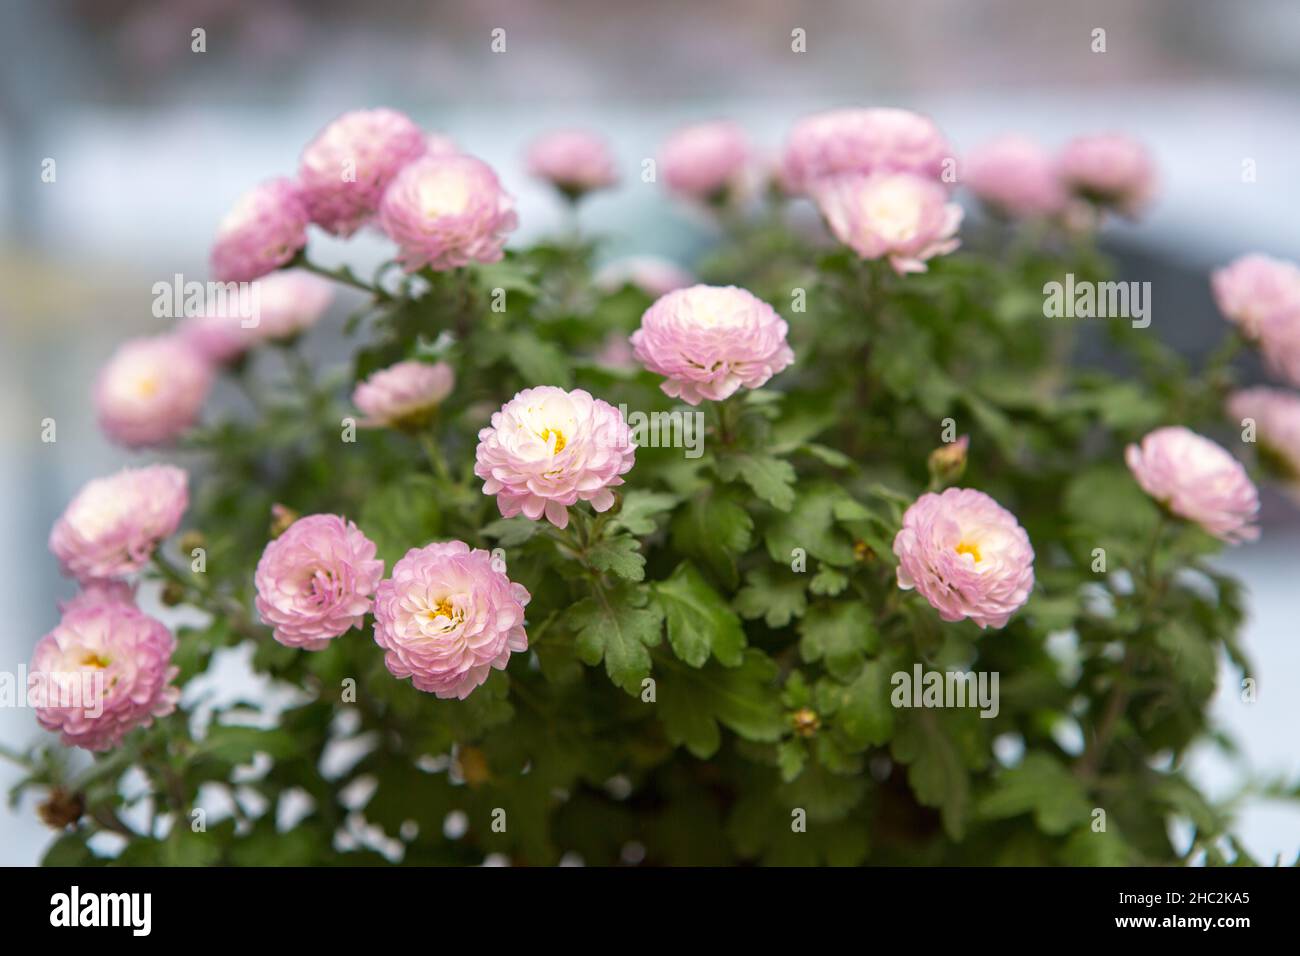 Pink Pot Mum Ping Pong Ju , a small, spherical chrysanthemum. Its flower language has the meaning of collection, good luck, and bring full of good Stock Photo